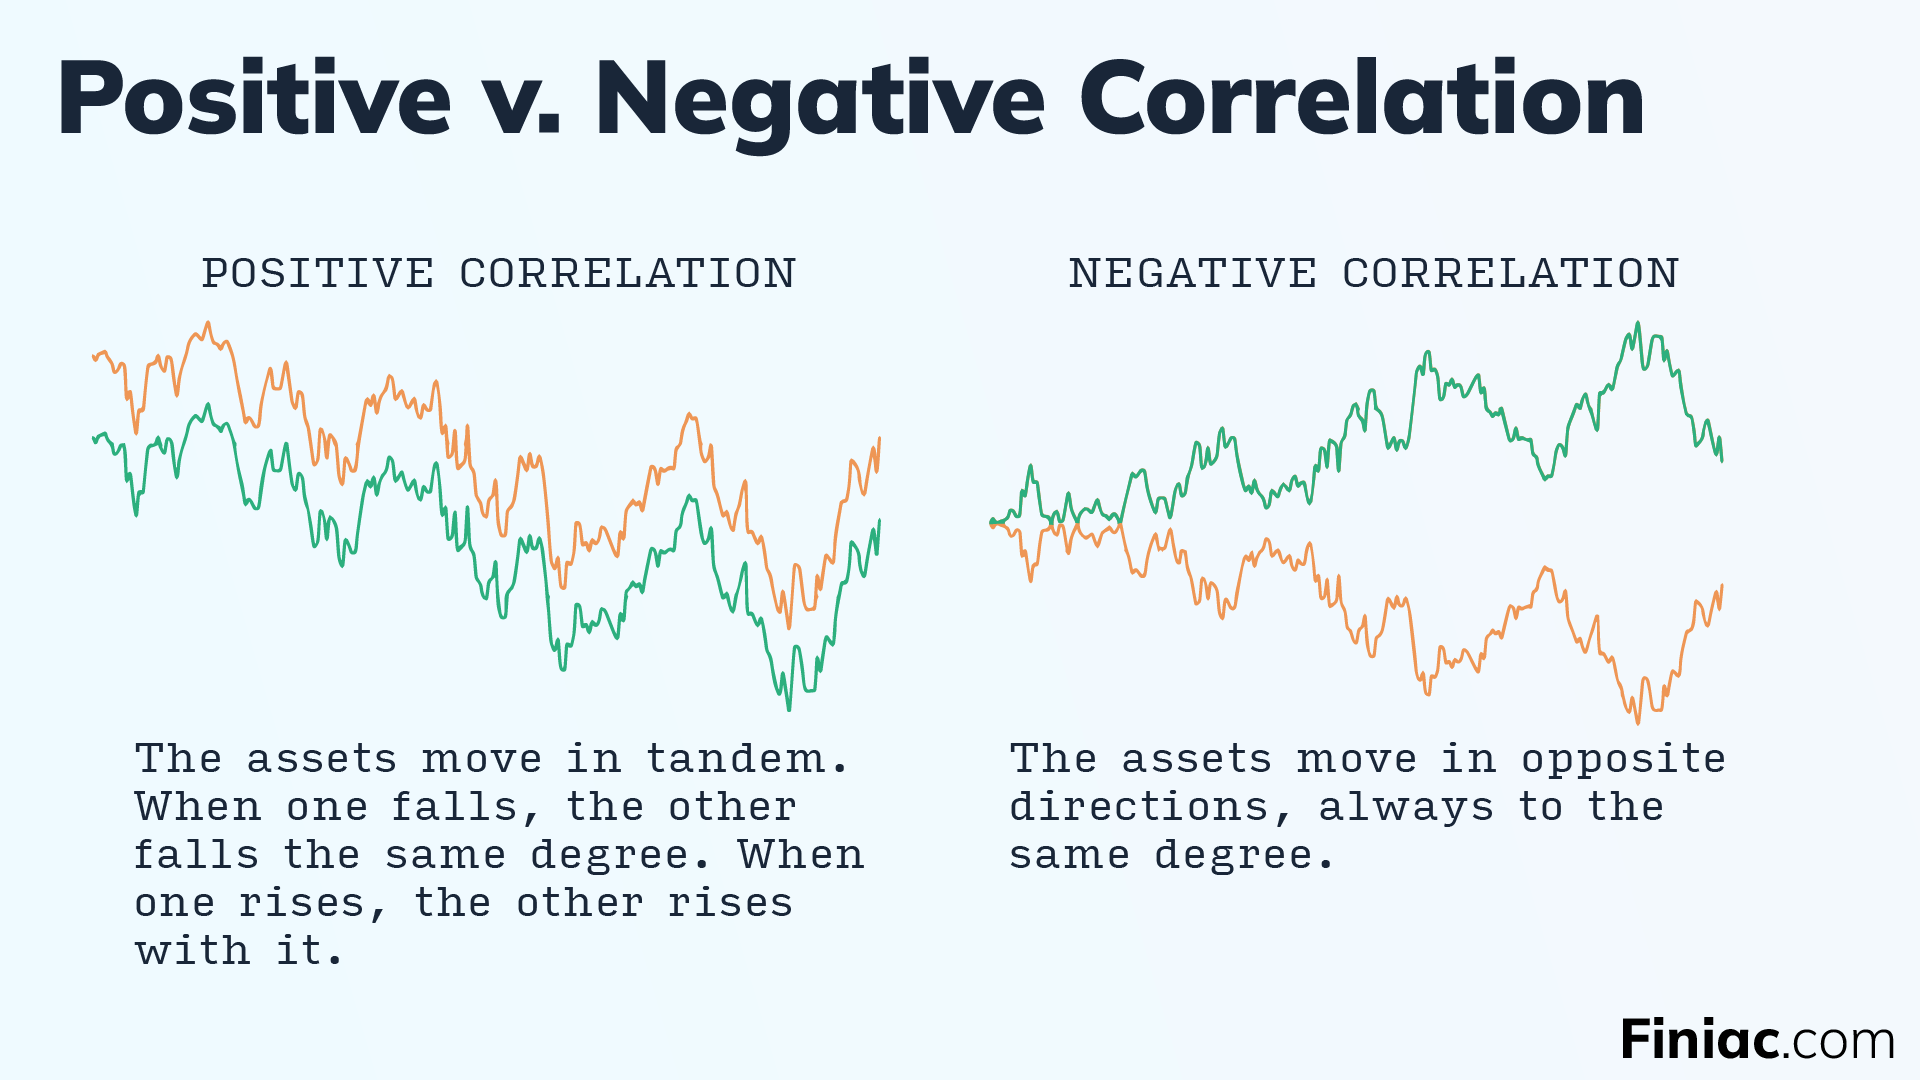 Infographic explaining the difference between positive and negative correlation.